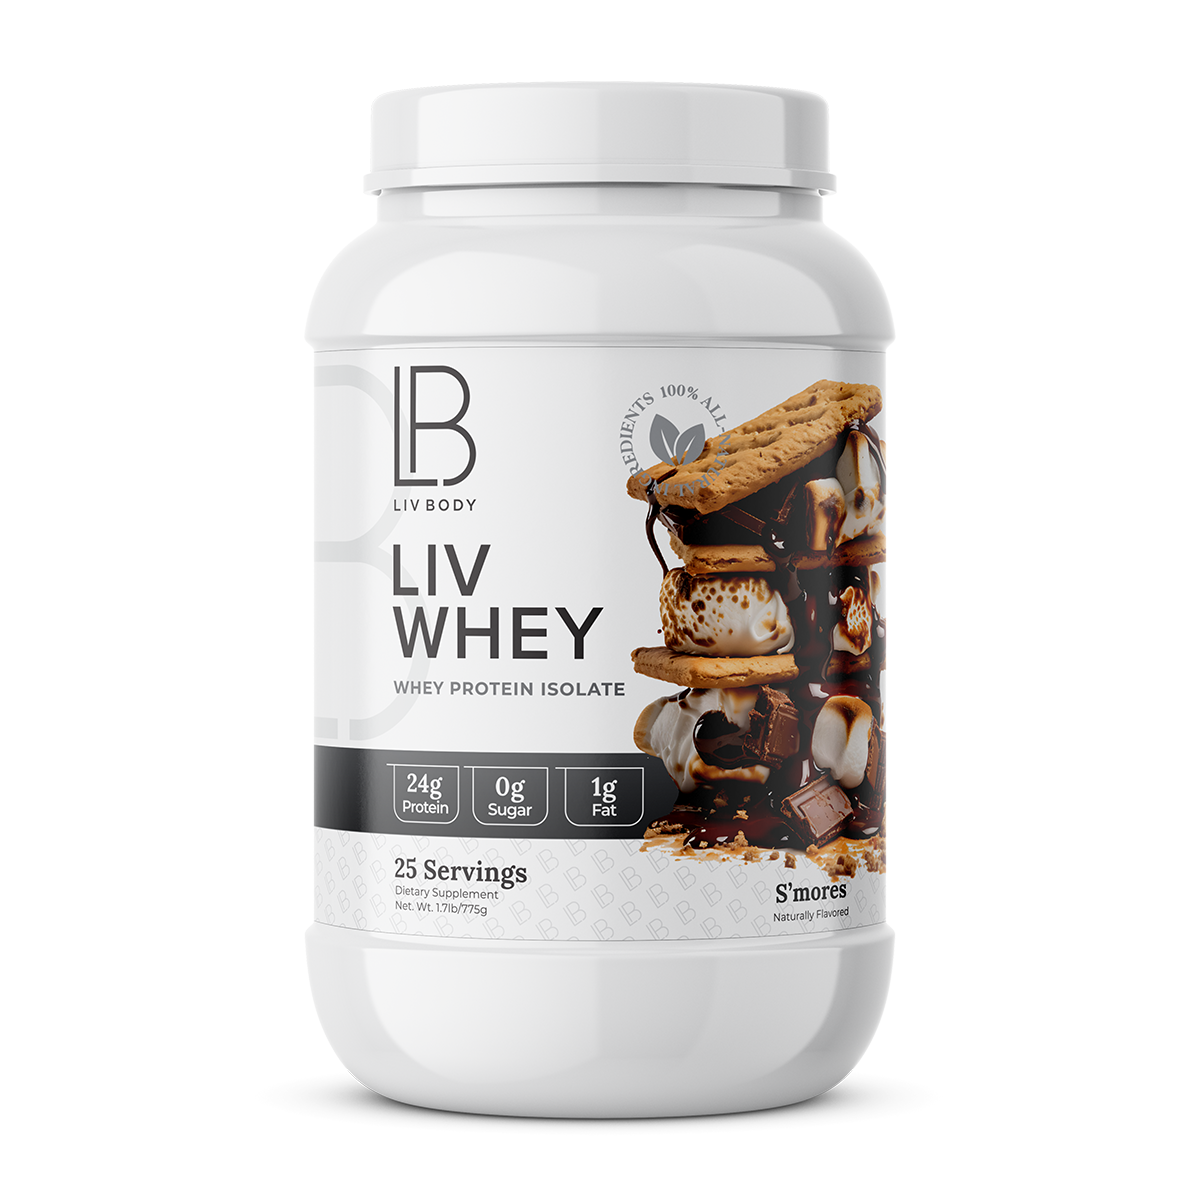 LIV Whey - Isolate Protein